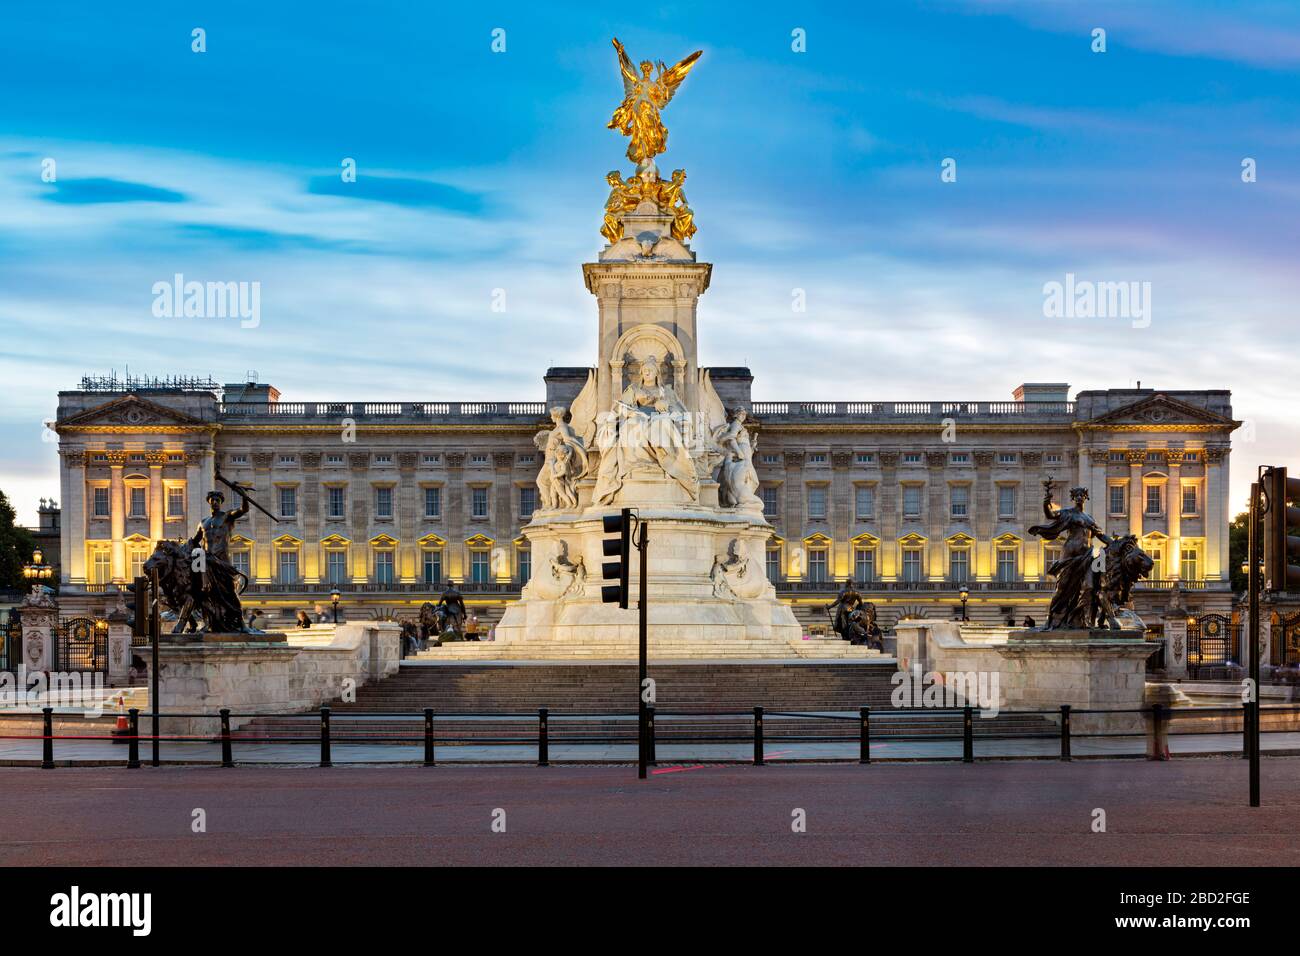 The Queen Victoria Memorial in front of Buckingham Palace, London, England, UK Stock Photo